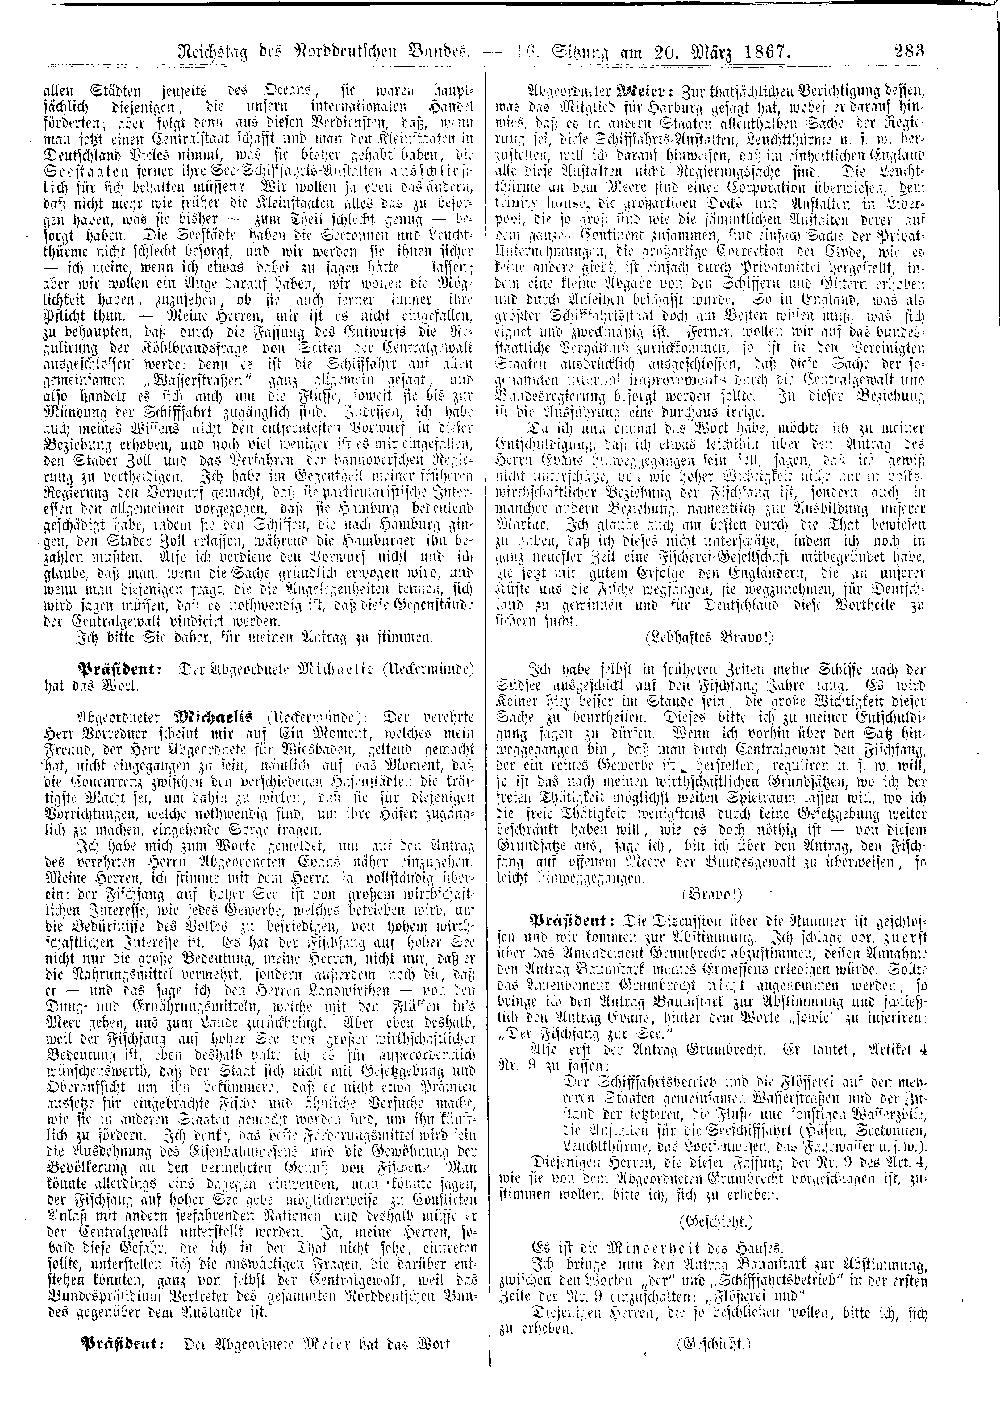 Scan of page 283